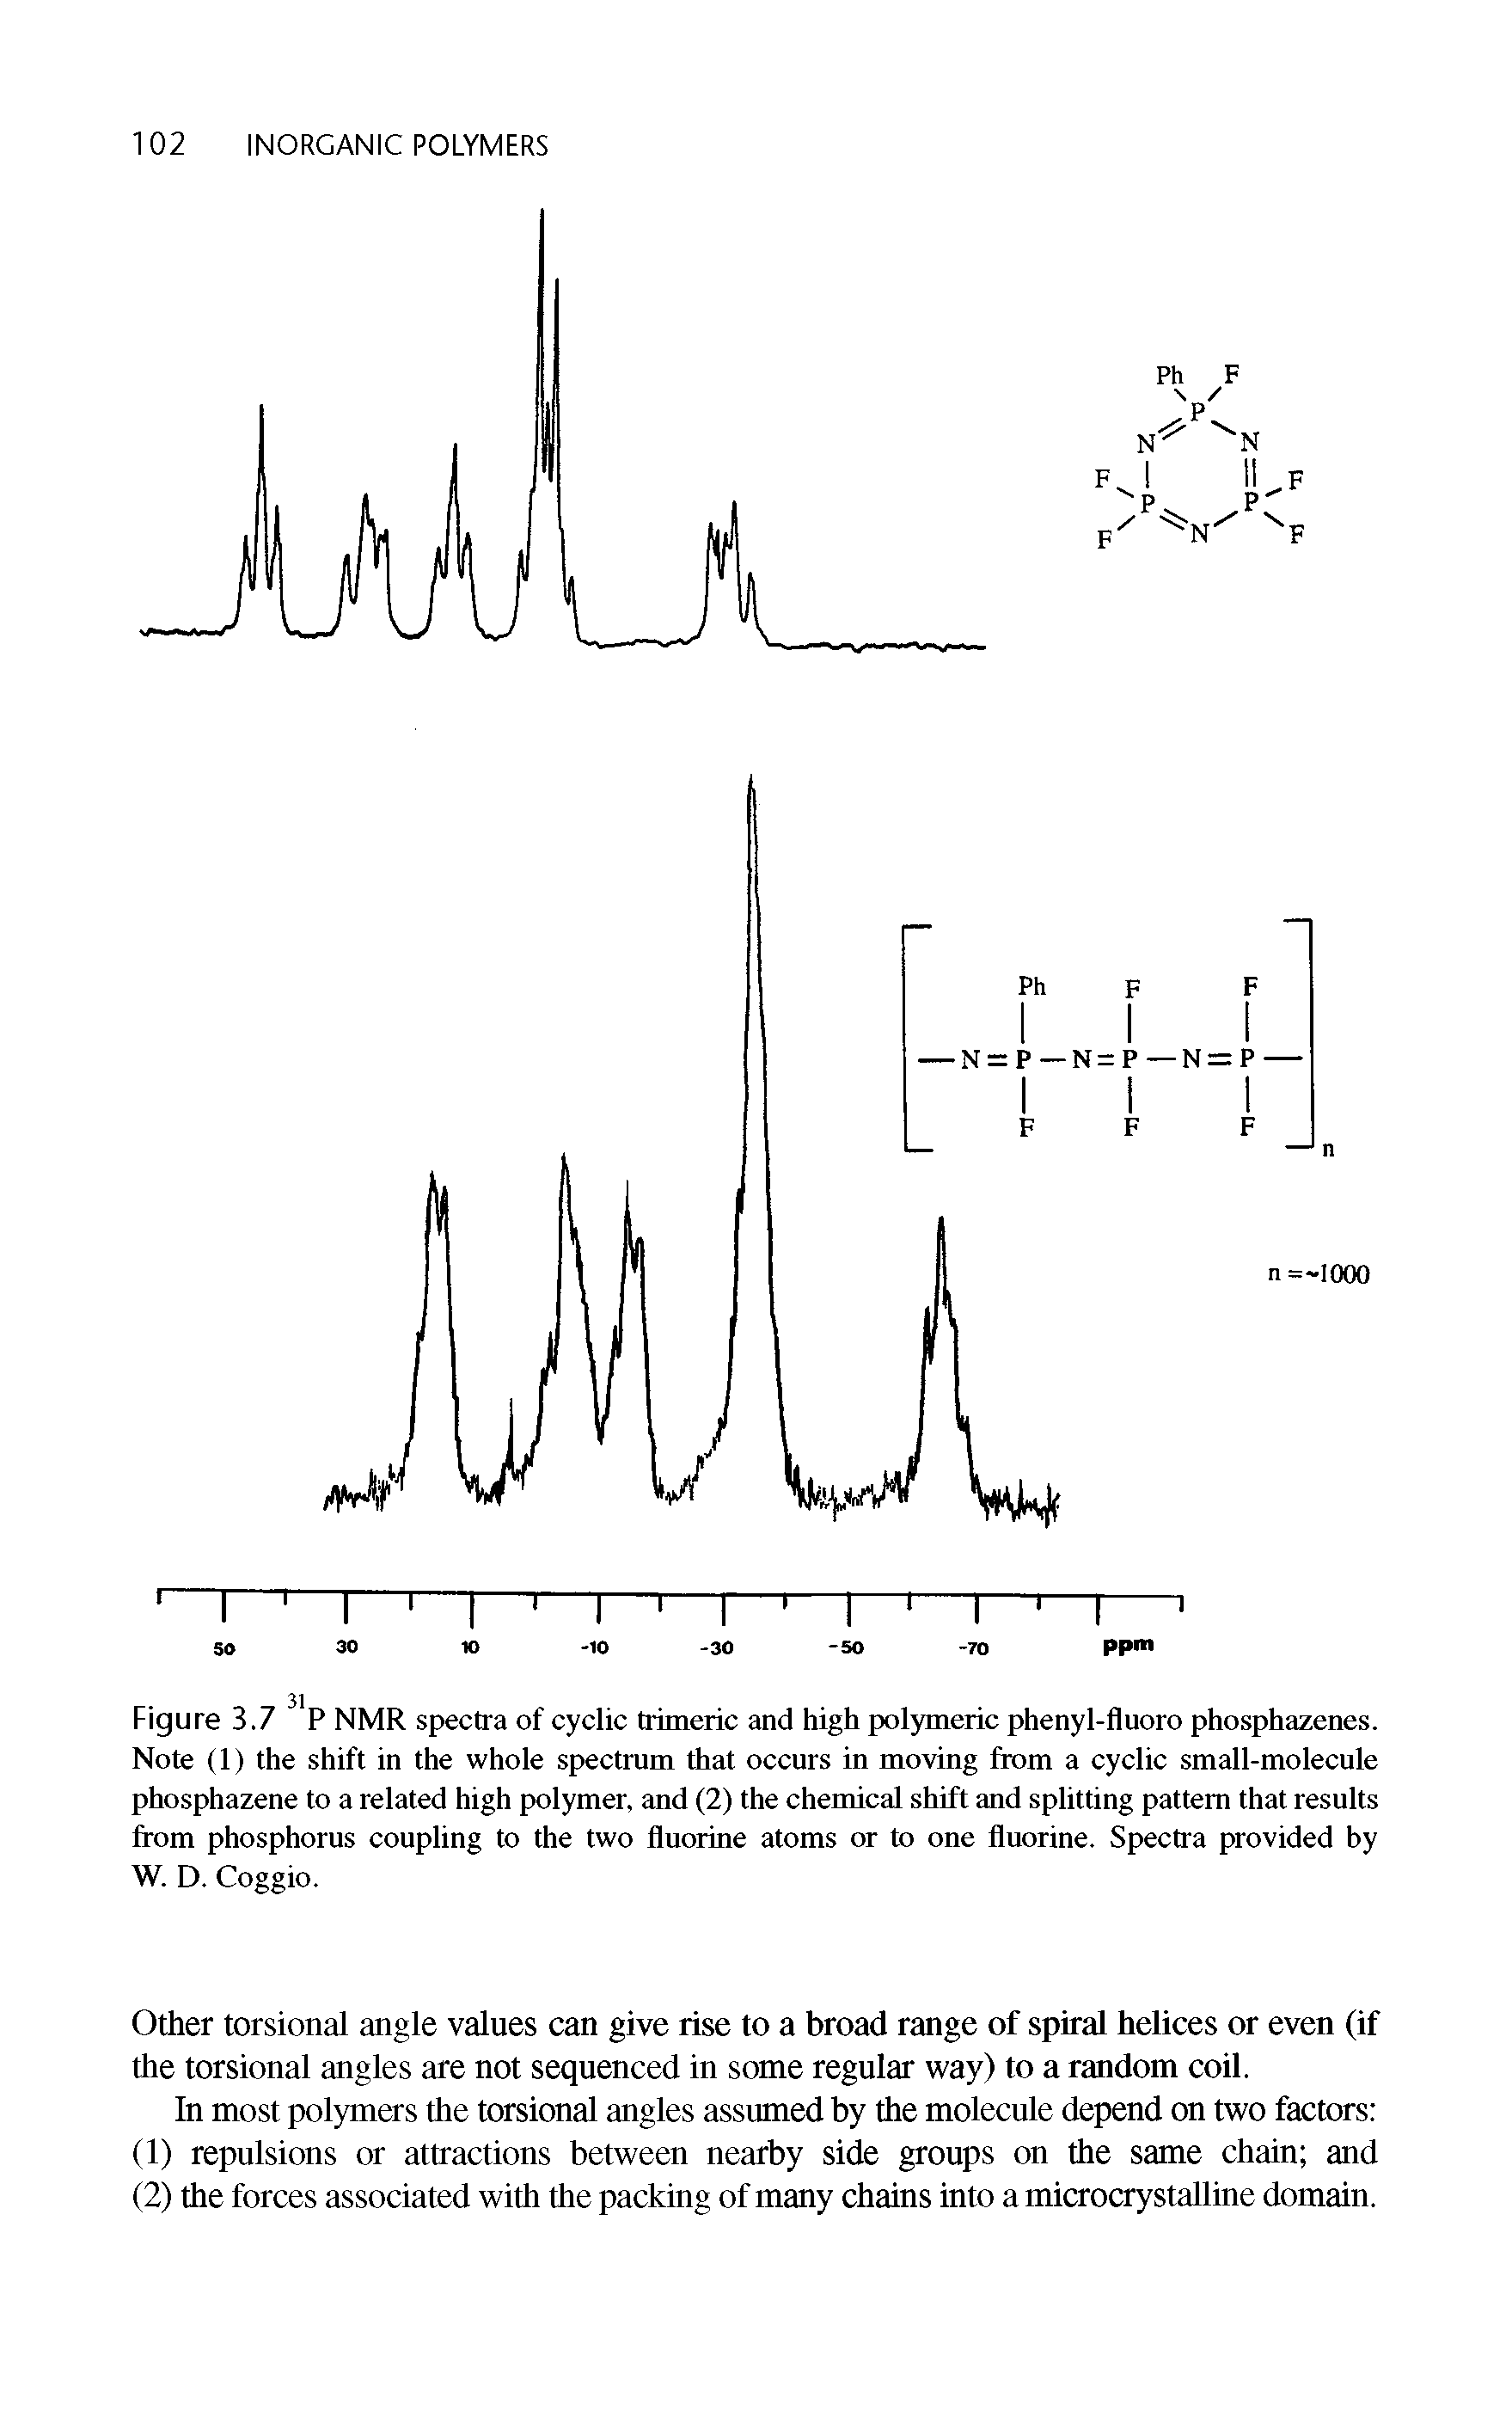 Figure 3.7 P NMR spectra of cyclic trimeric and high polymeric phenyl-fluoro phosphazenes. Note (1) the shift in the whole spectrum that occurs in moving from a cyclic small-molecule phosphazene to a related high polymer, and (2) the chemical shift and splitting pattern that results from phosphorus coupling to the two fluorine atoms or to one fluorine. Spectra provided by W. D. Coggio.